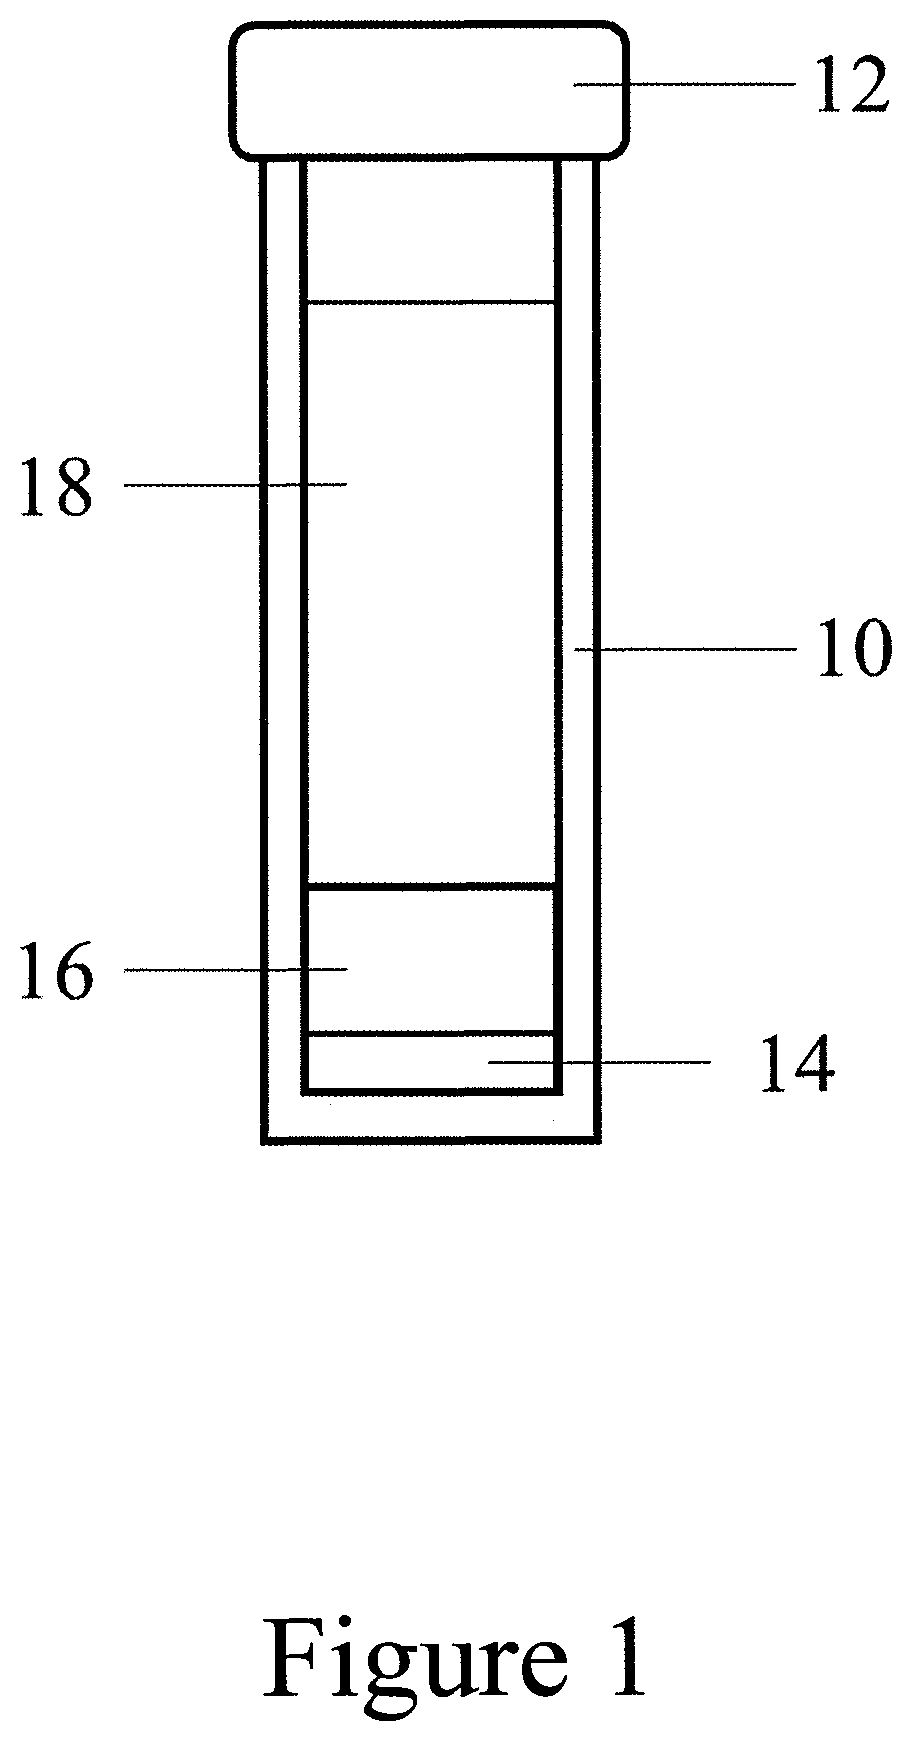 Method for the assessment of alkali-silica reactivity of aggregates and concrete mixtures